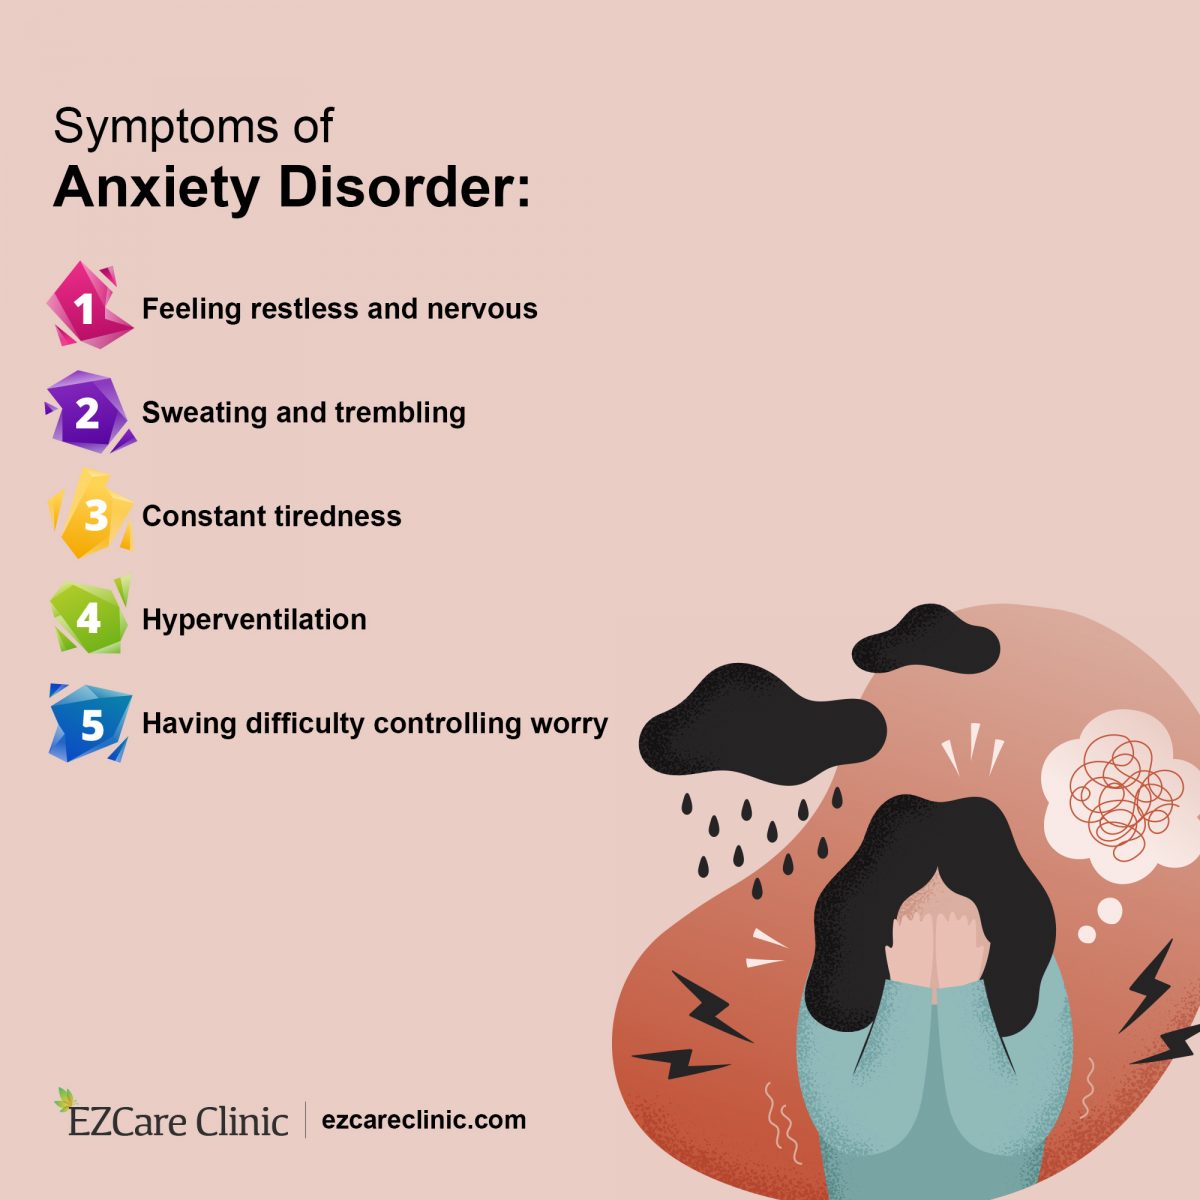 OCD Vs. Anxiety Disorder: What’s the Difference? - EZCare Clinic